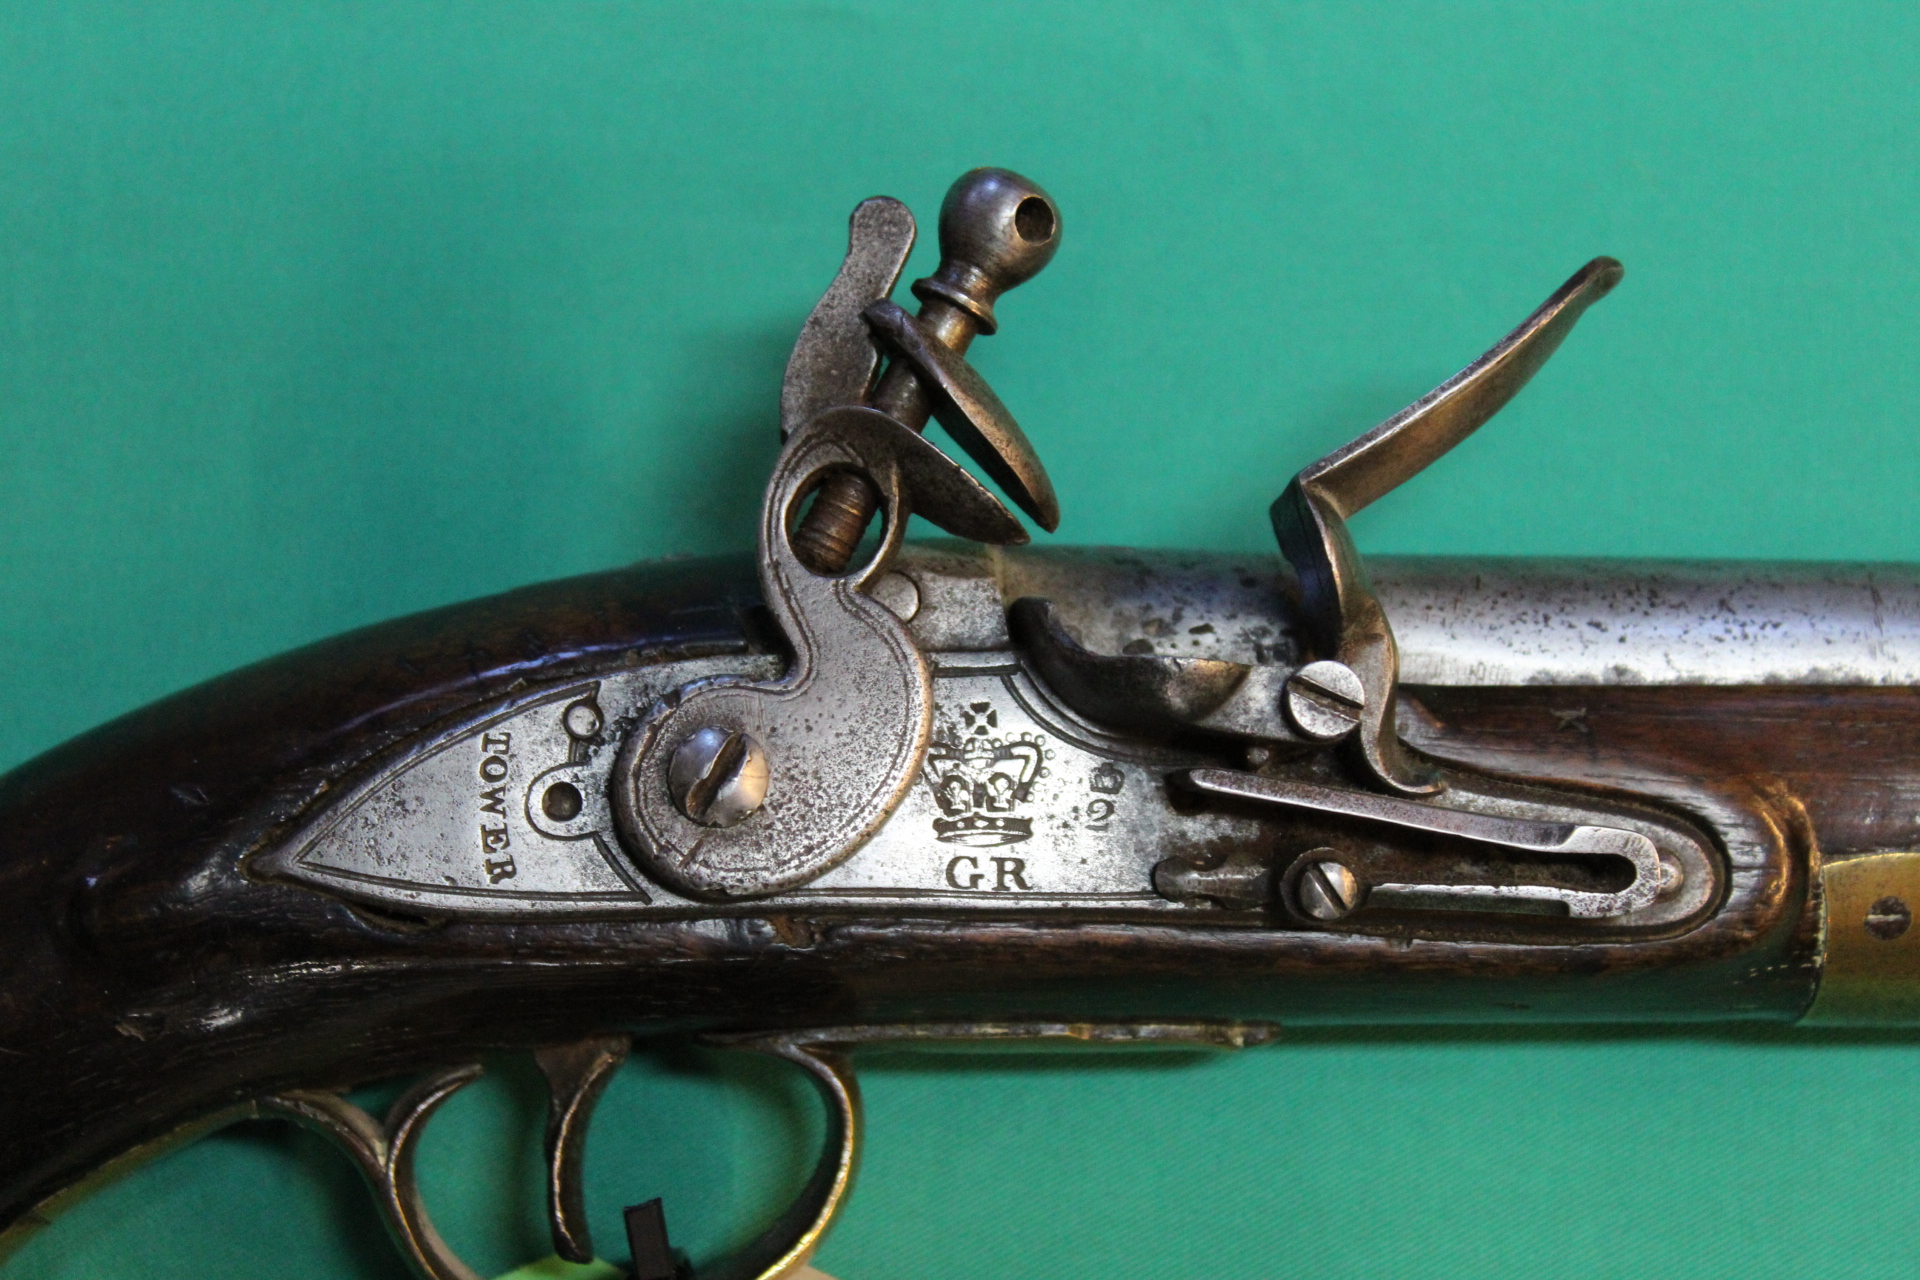 A 'new land model' cavalry Flintlock pistol of approx 16 bore, lock marked crown over G.R. - Image 2 of 2